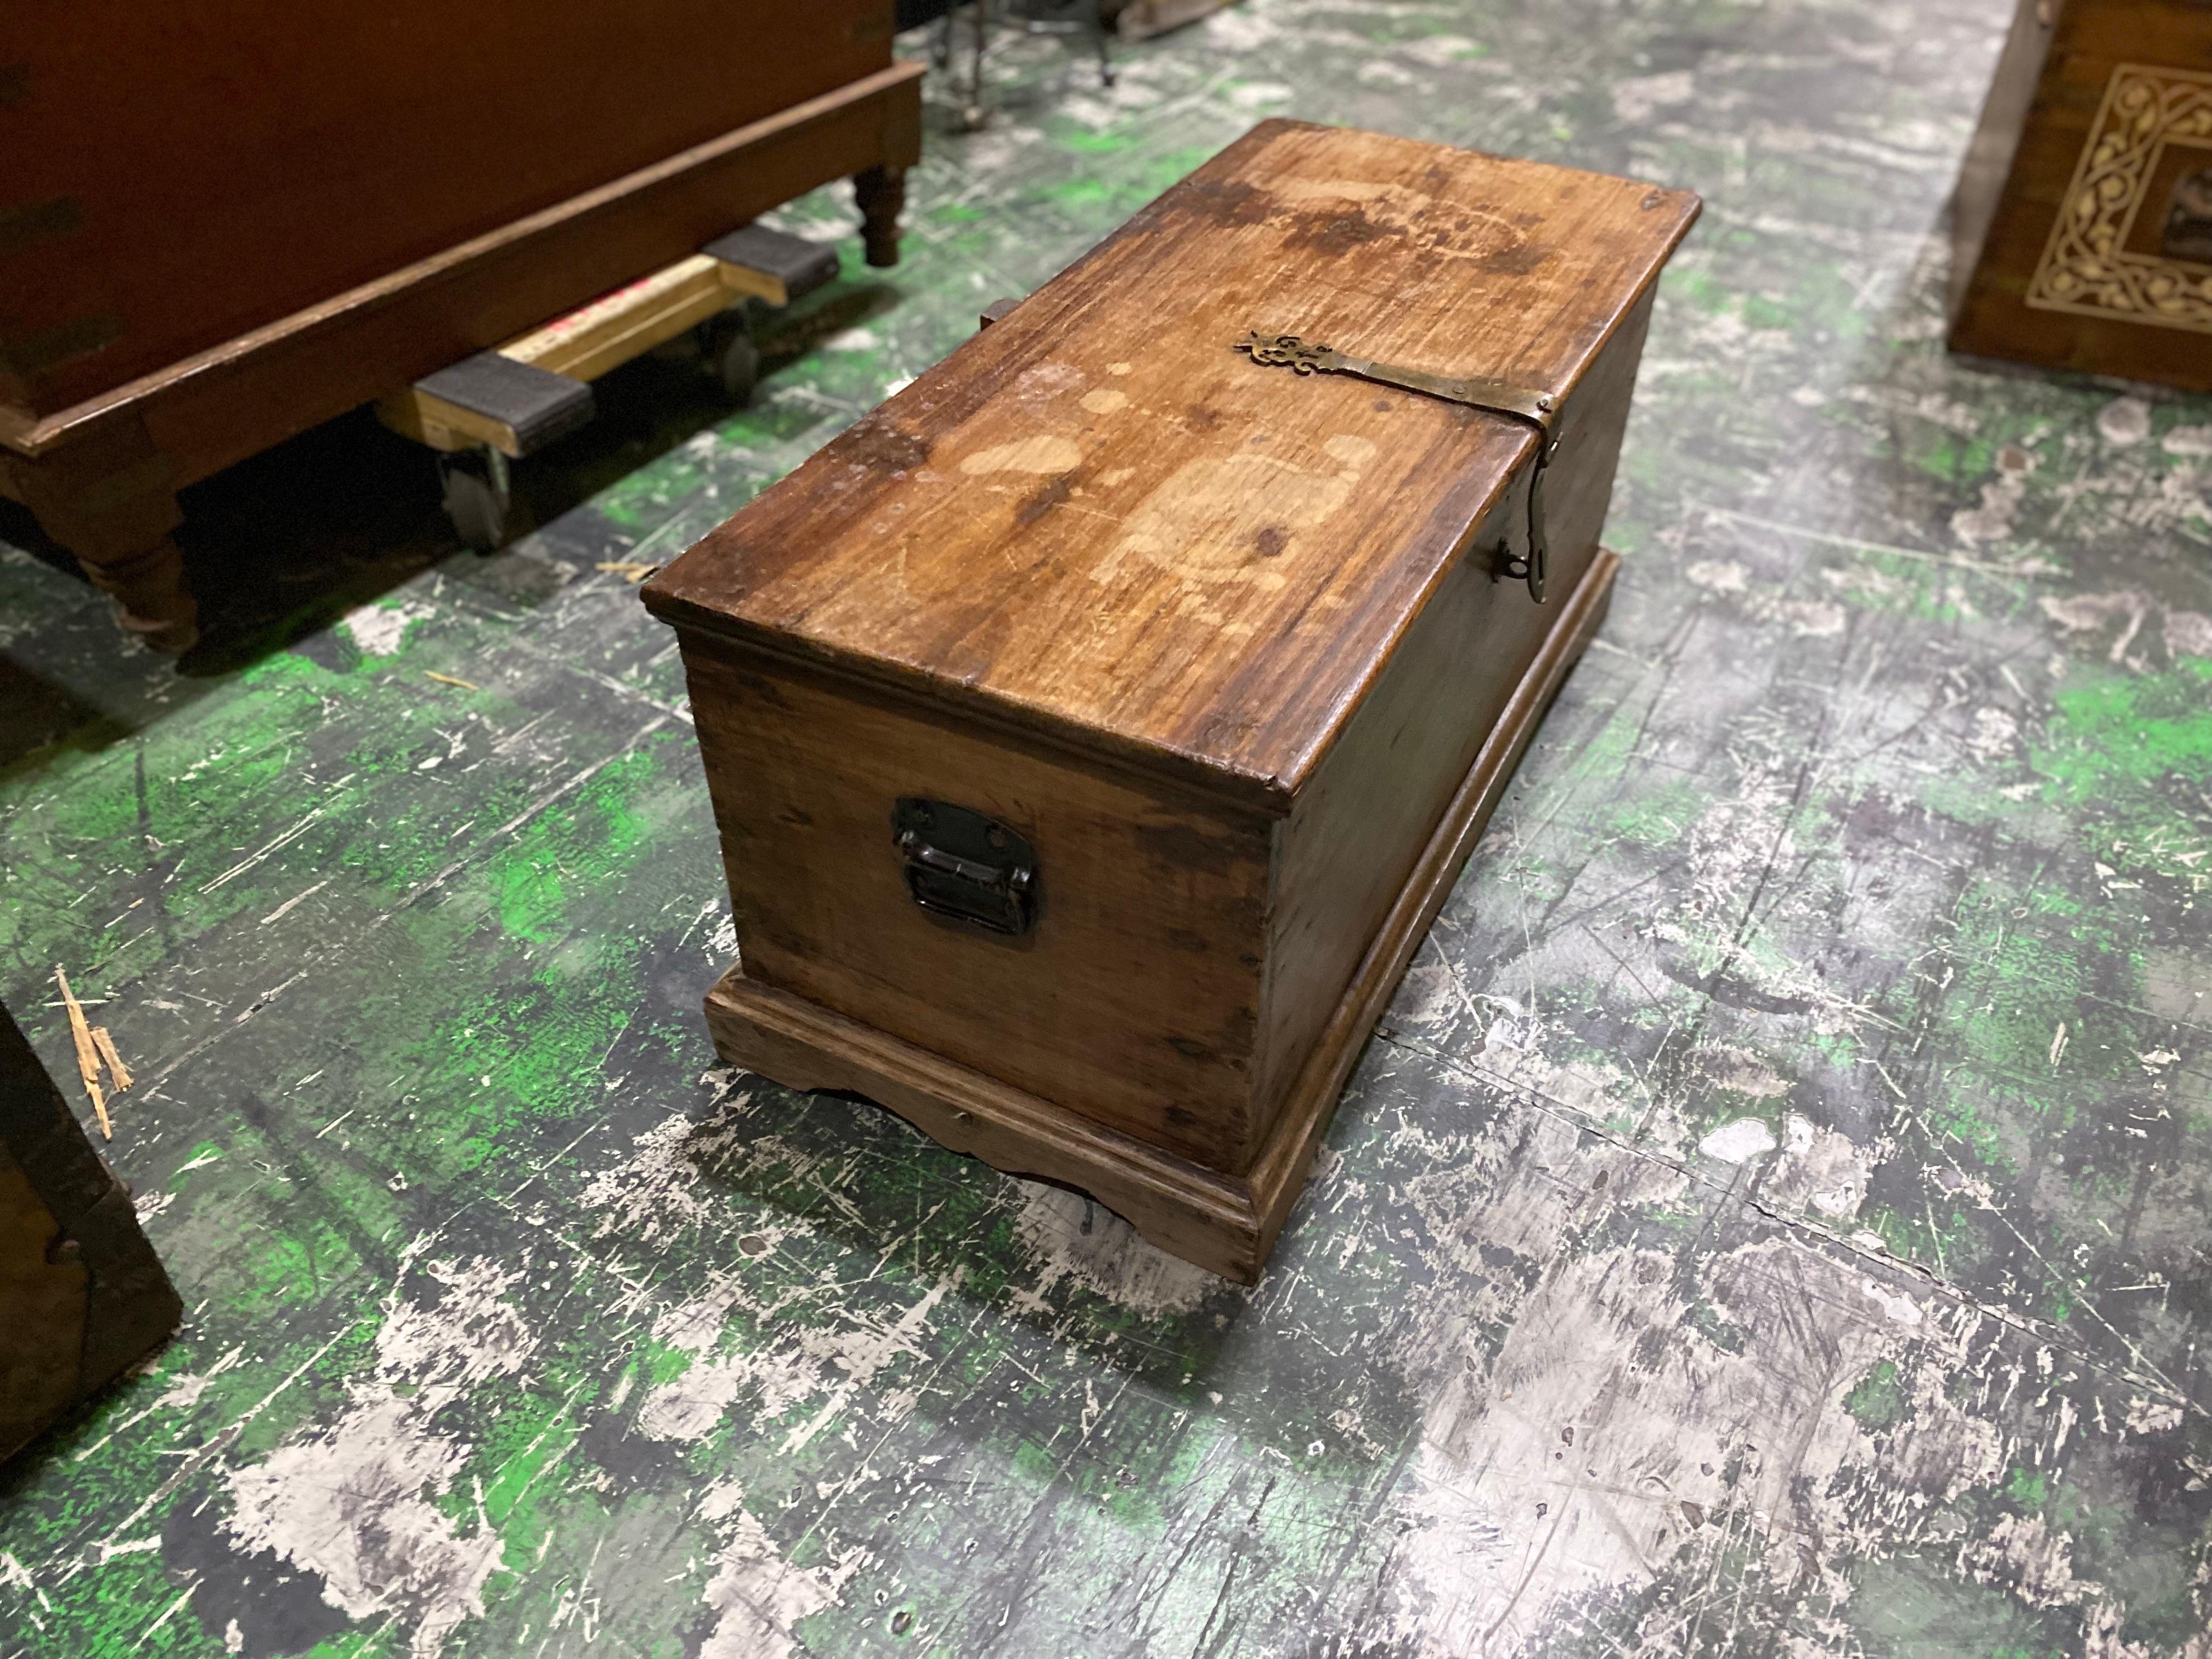 Late 19th Century French Bible Box, Trunk, Blanket chest.
Likely used as a chest to hold sacred items such as a bible, music manuscripts, candles, etc. A simply constructed wood box with no decoration except the original brass strap hinge with